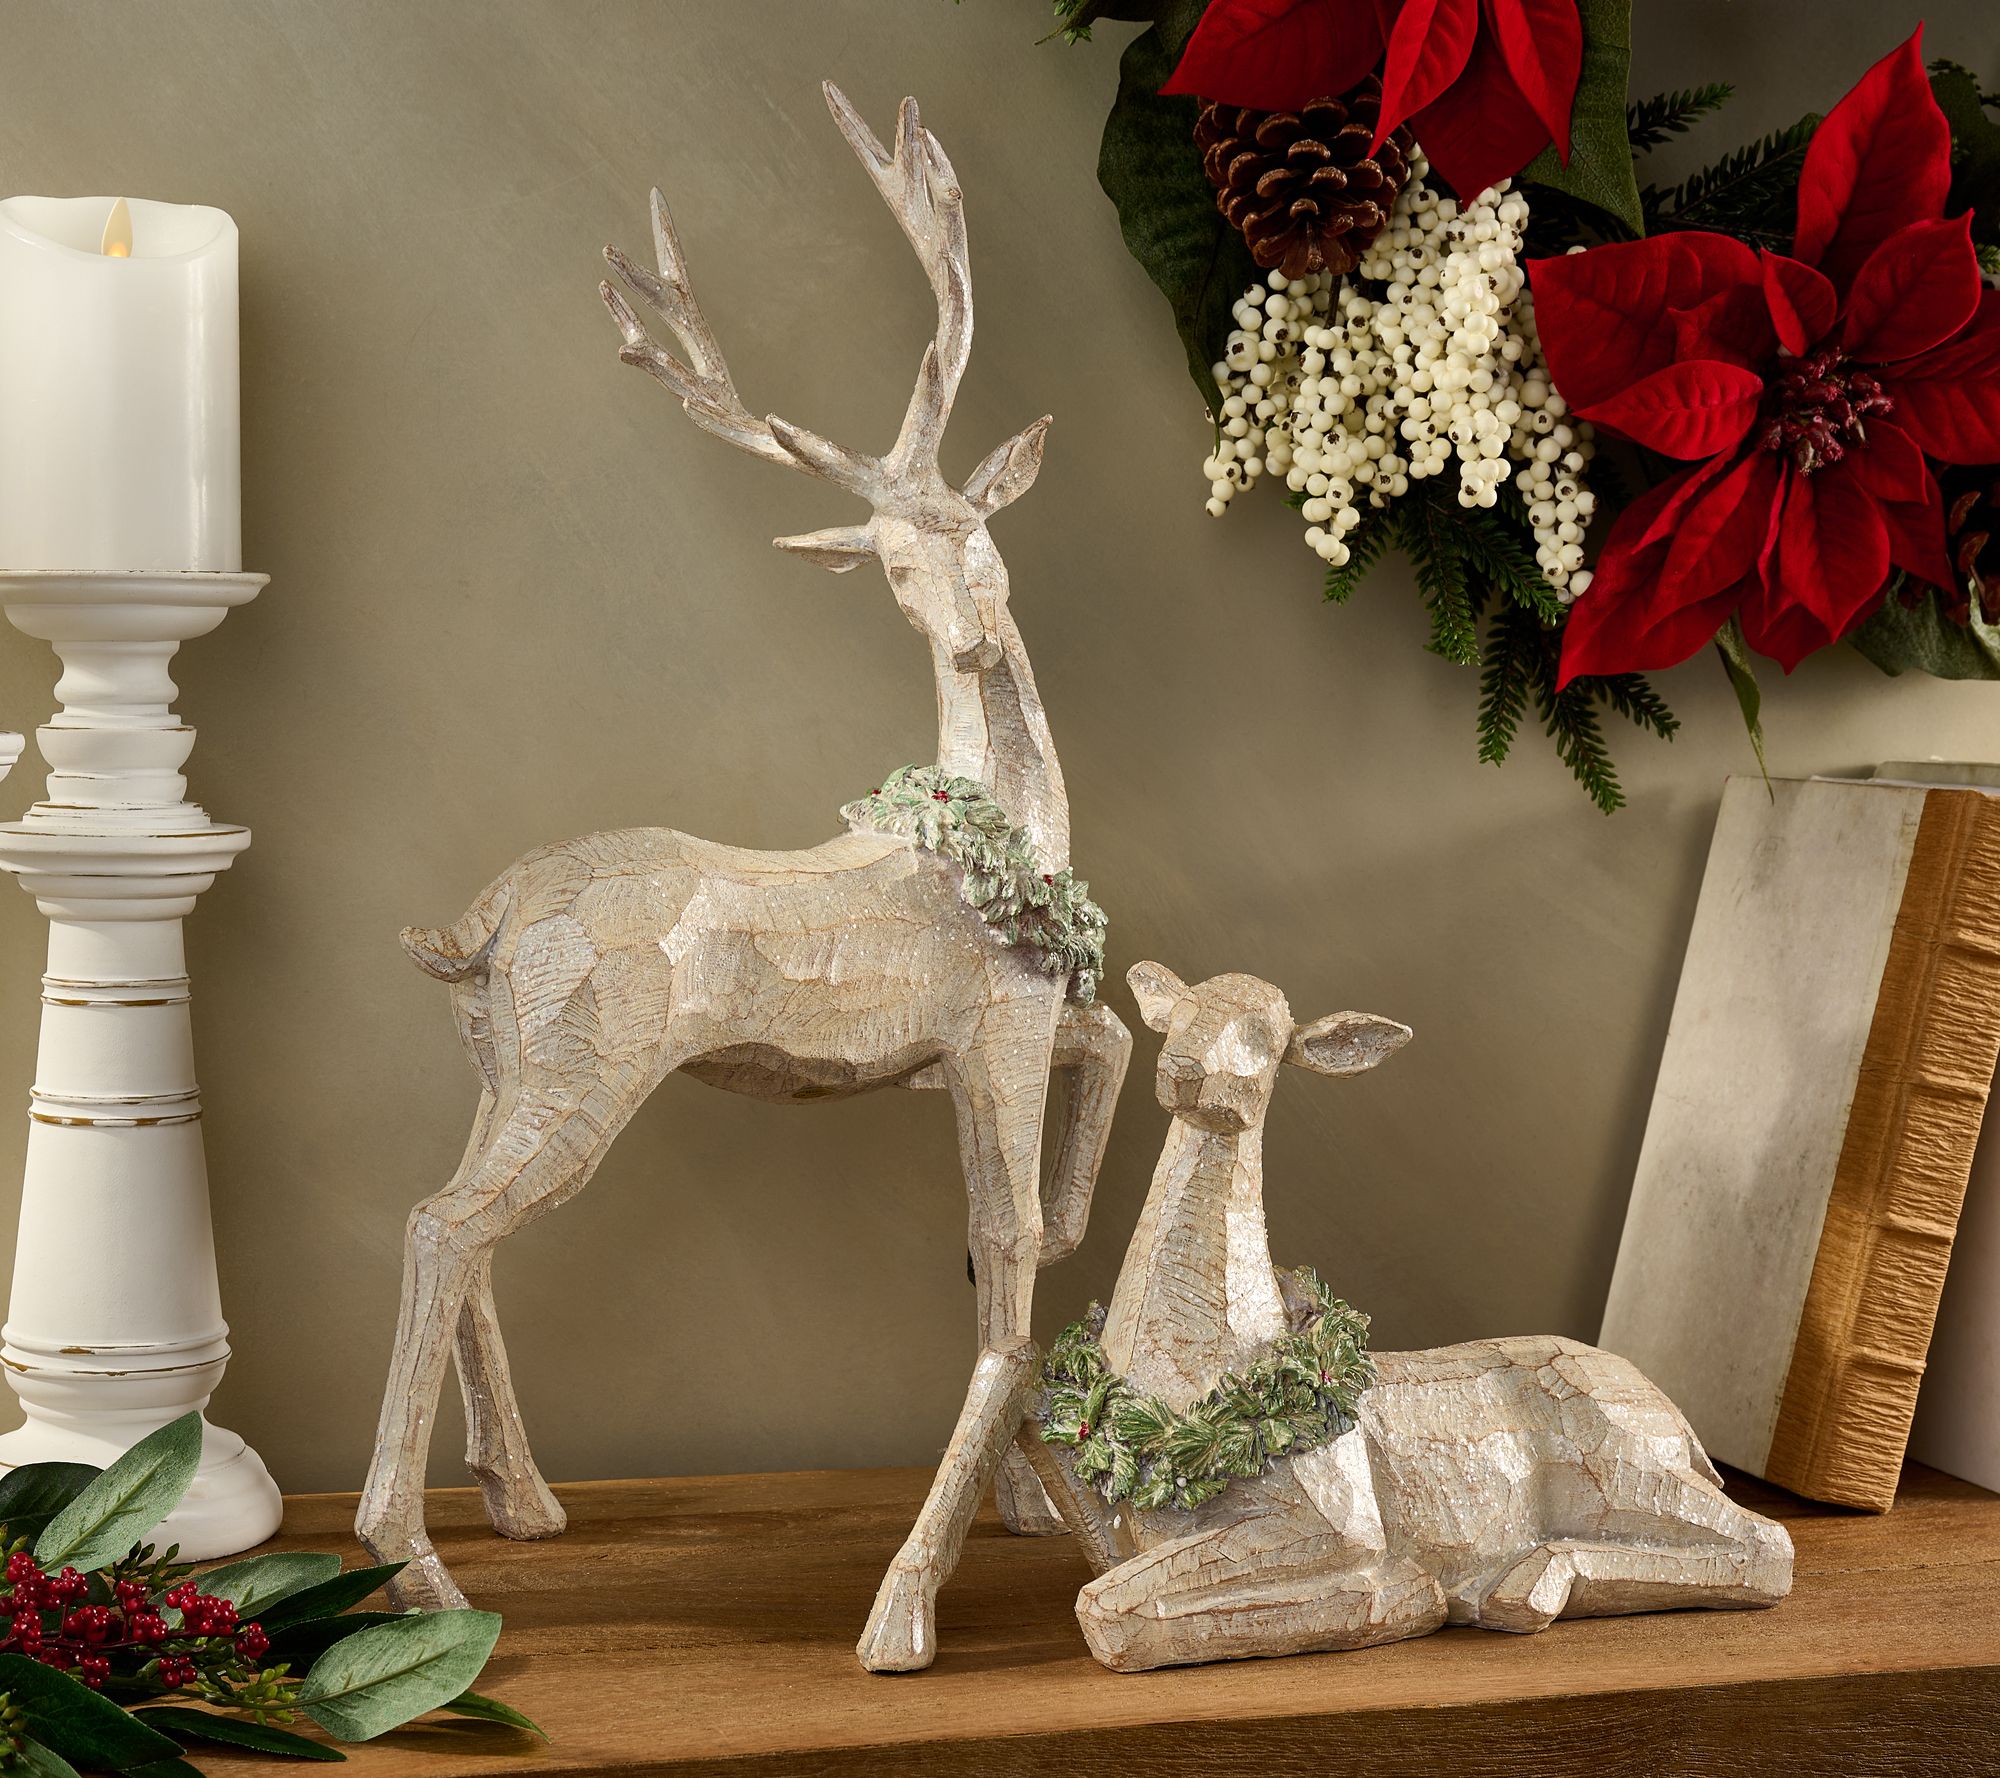 2 Piece Deer Figures with Wreath by Valerie - QVC.com